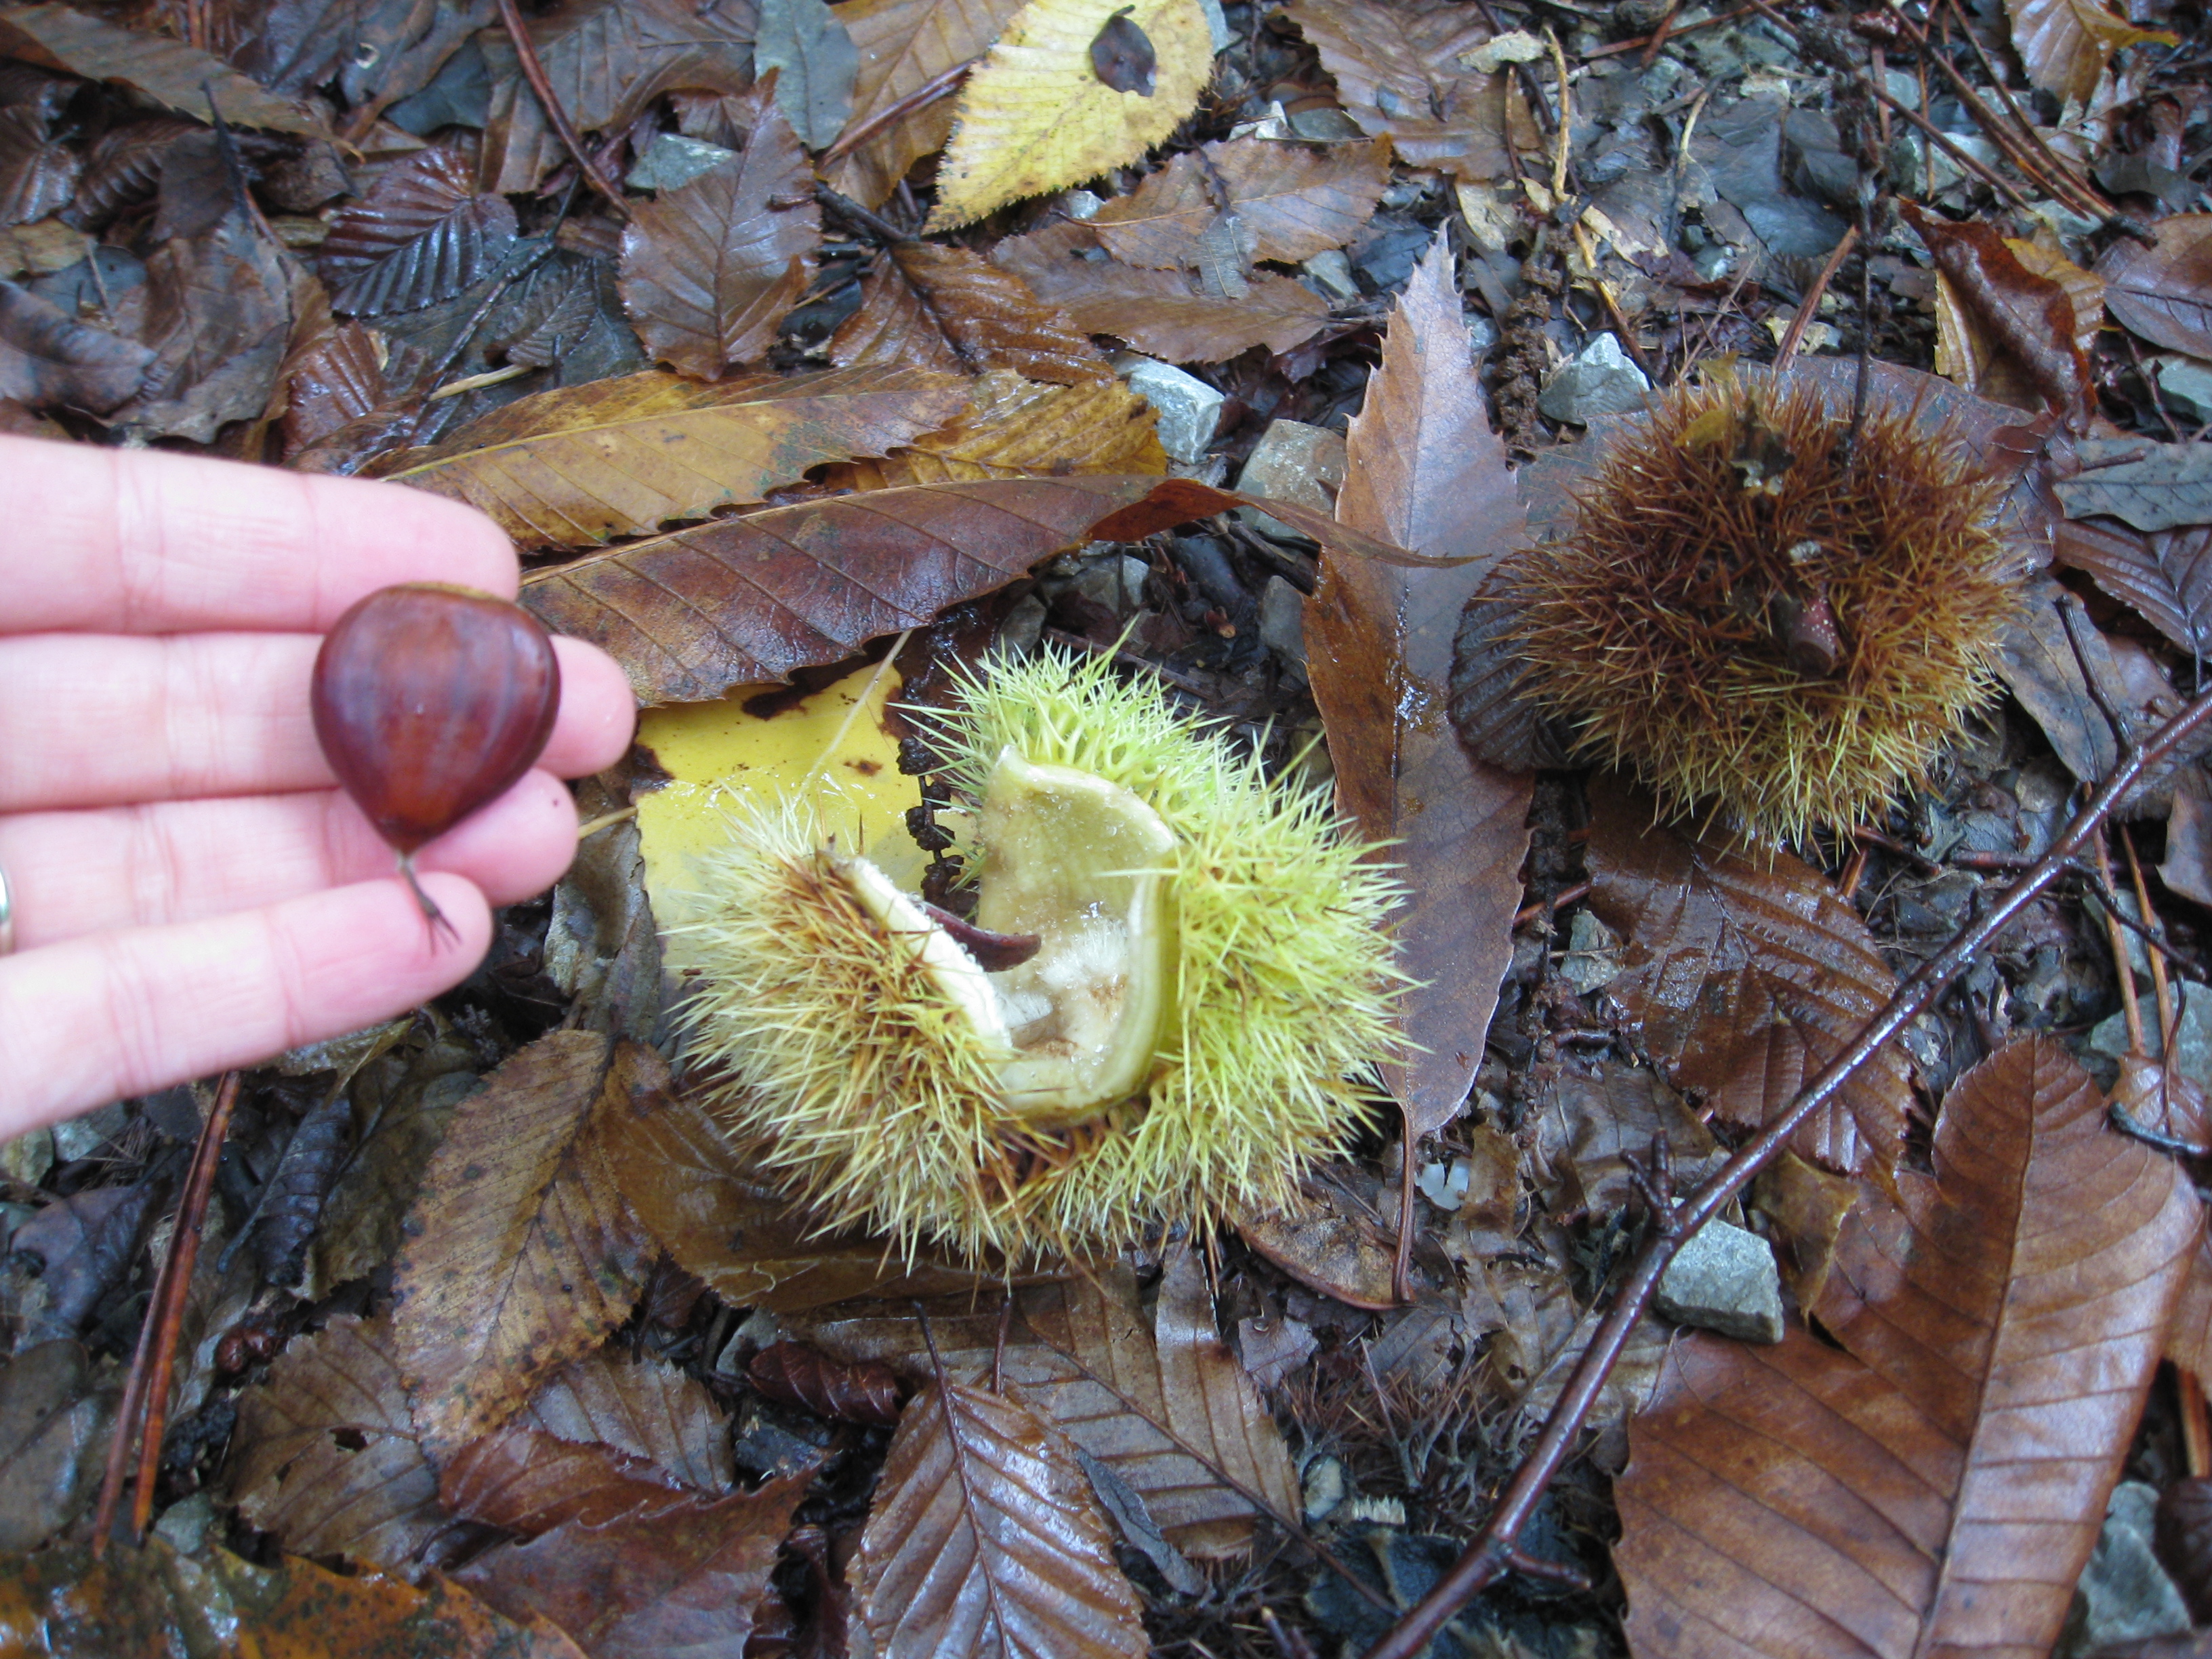 We might have smuggled a few home to eat, not grow. Our soil isn't acidic enough for chestnut trees.